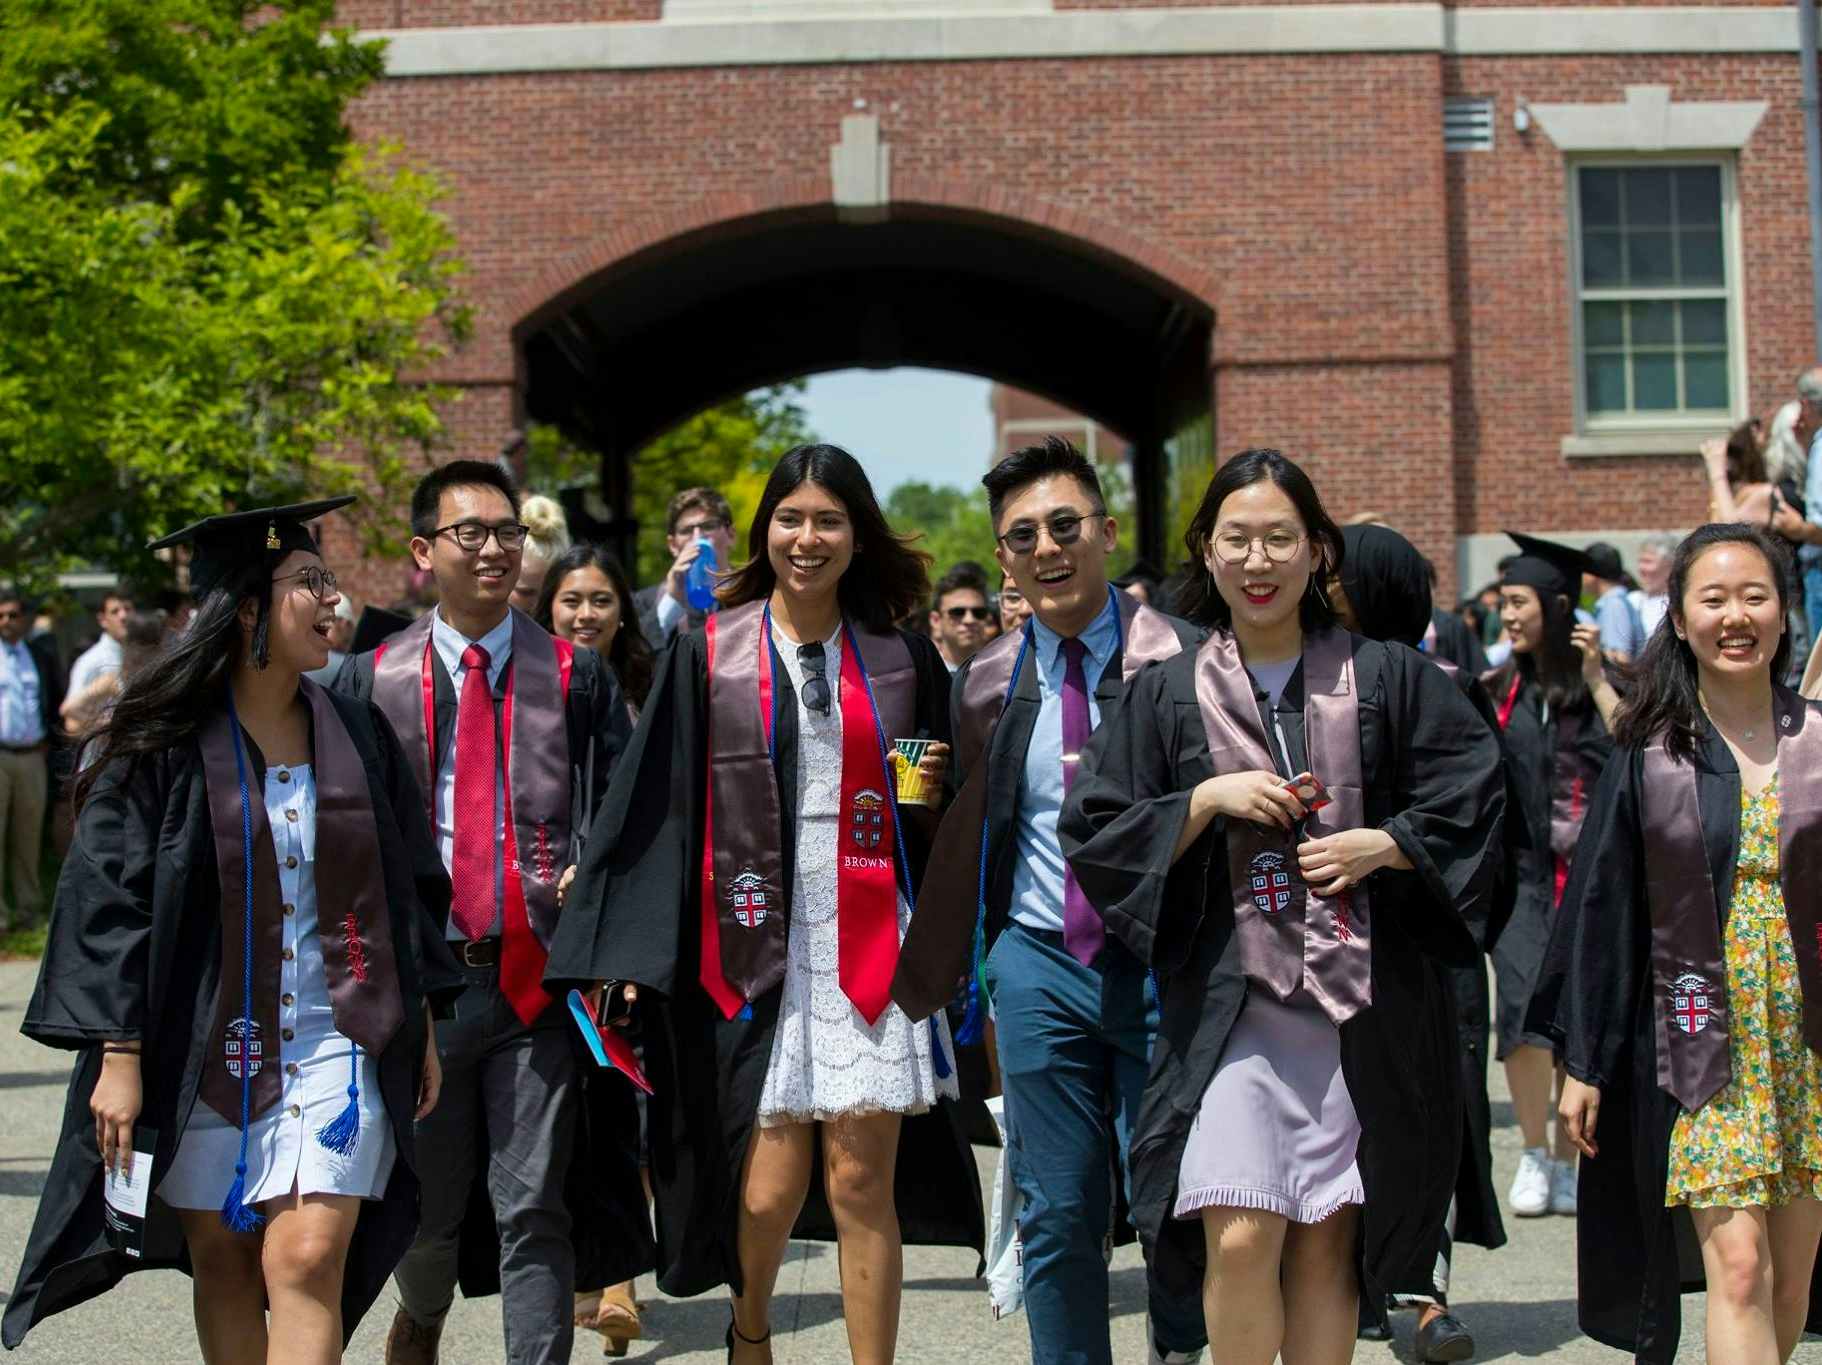 A group of students walking at Brown University wearing graduation gowns.